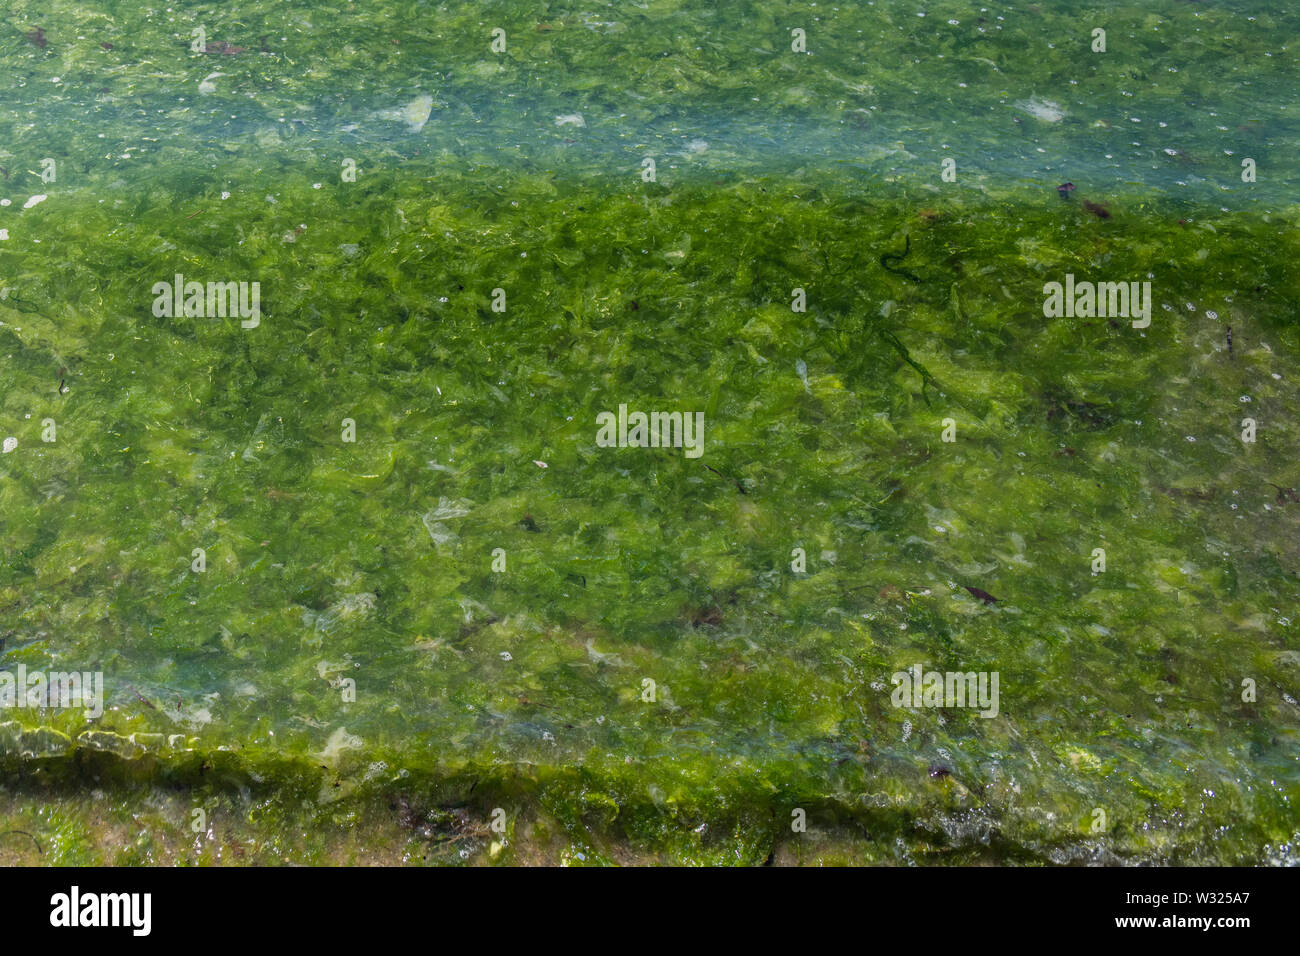 The green seaweed algae Sea Lettuce / Ulva lactuca washed ashore on a beach and deposited at the drift line. Washed up metaphor, stranded concept. Stock Photo